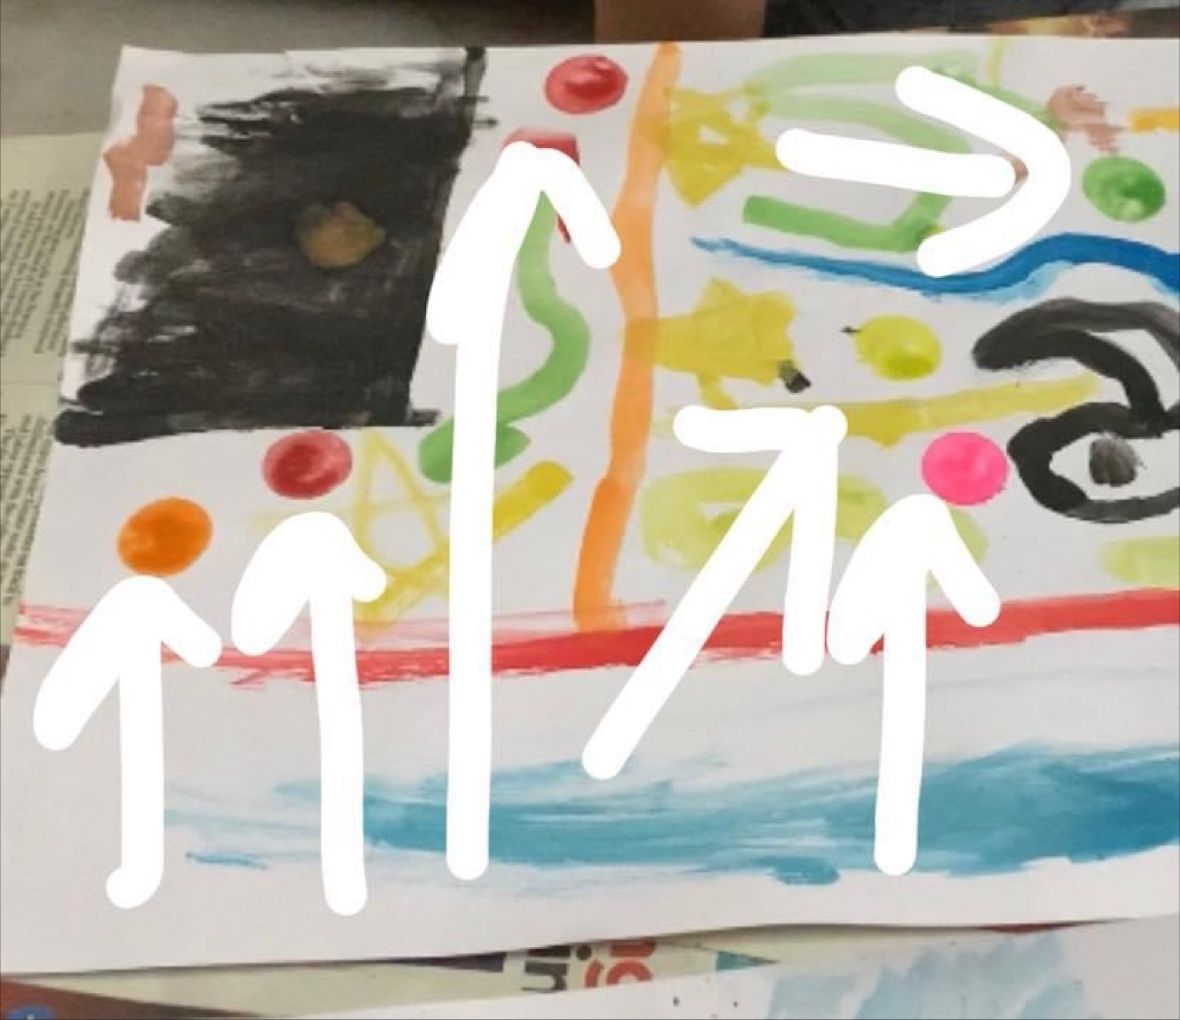 Florence Chuah on LinkedIn: During an art session, a student was making ...